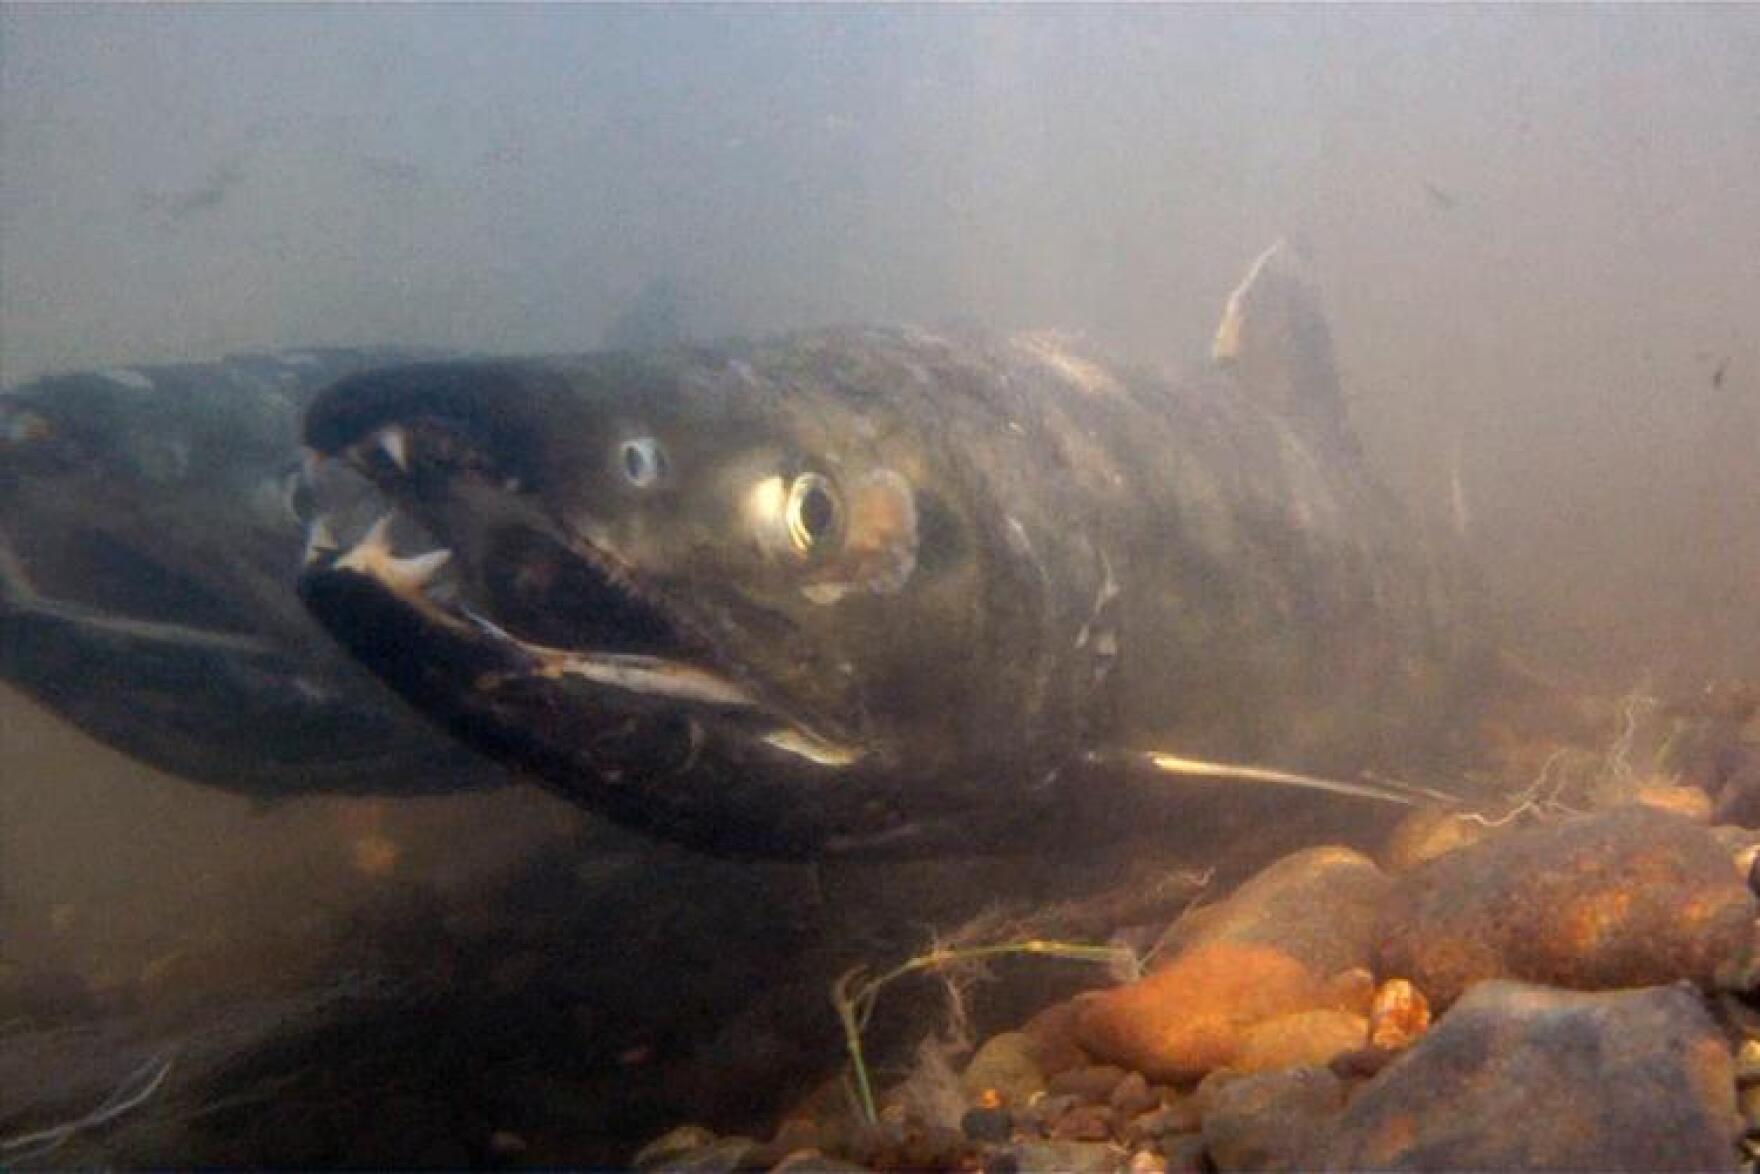 Yukon River chum and coho runs remain too low to open subsistence harvest